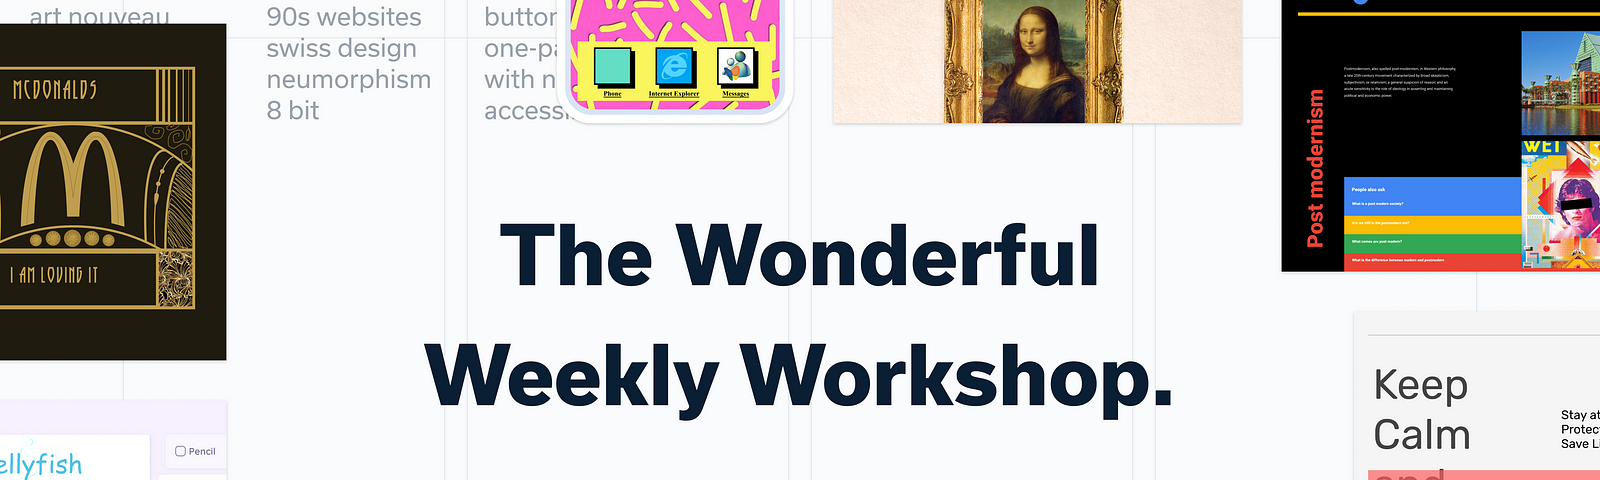 A header image with lots of UI designs and the title “The Wonderful Weekly Workshop”